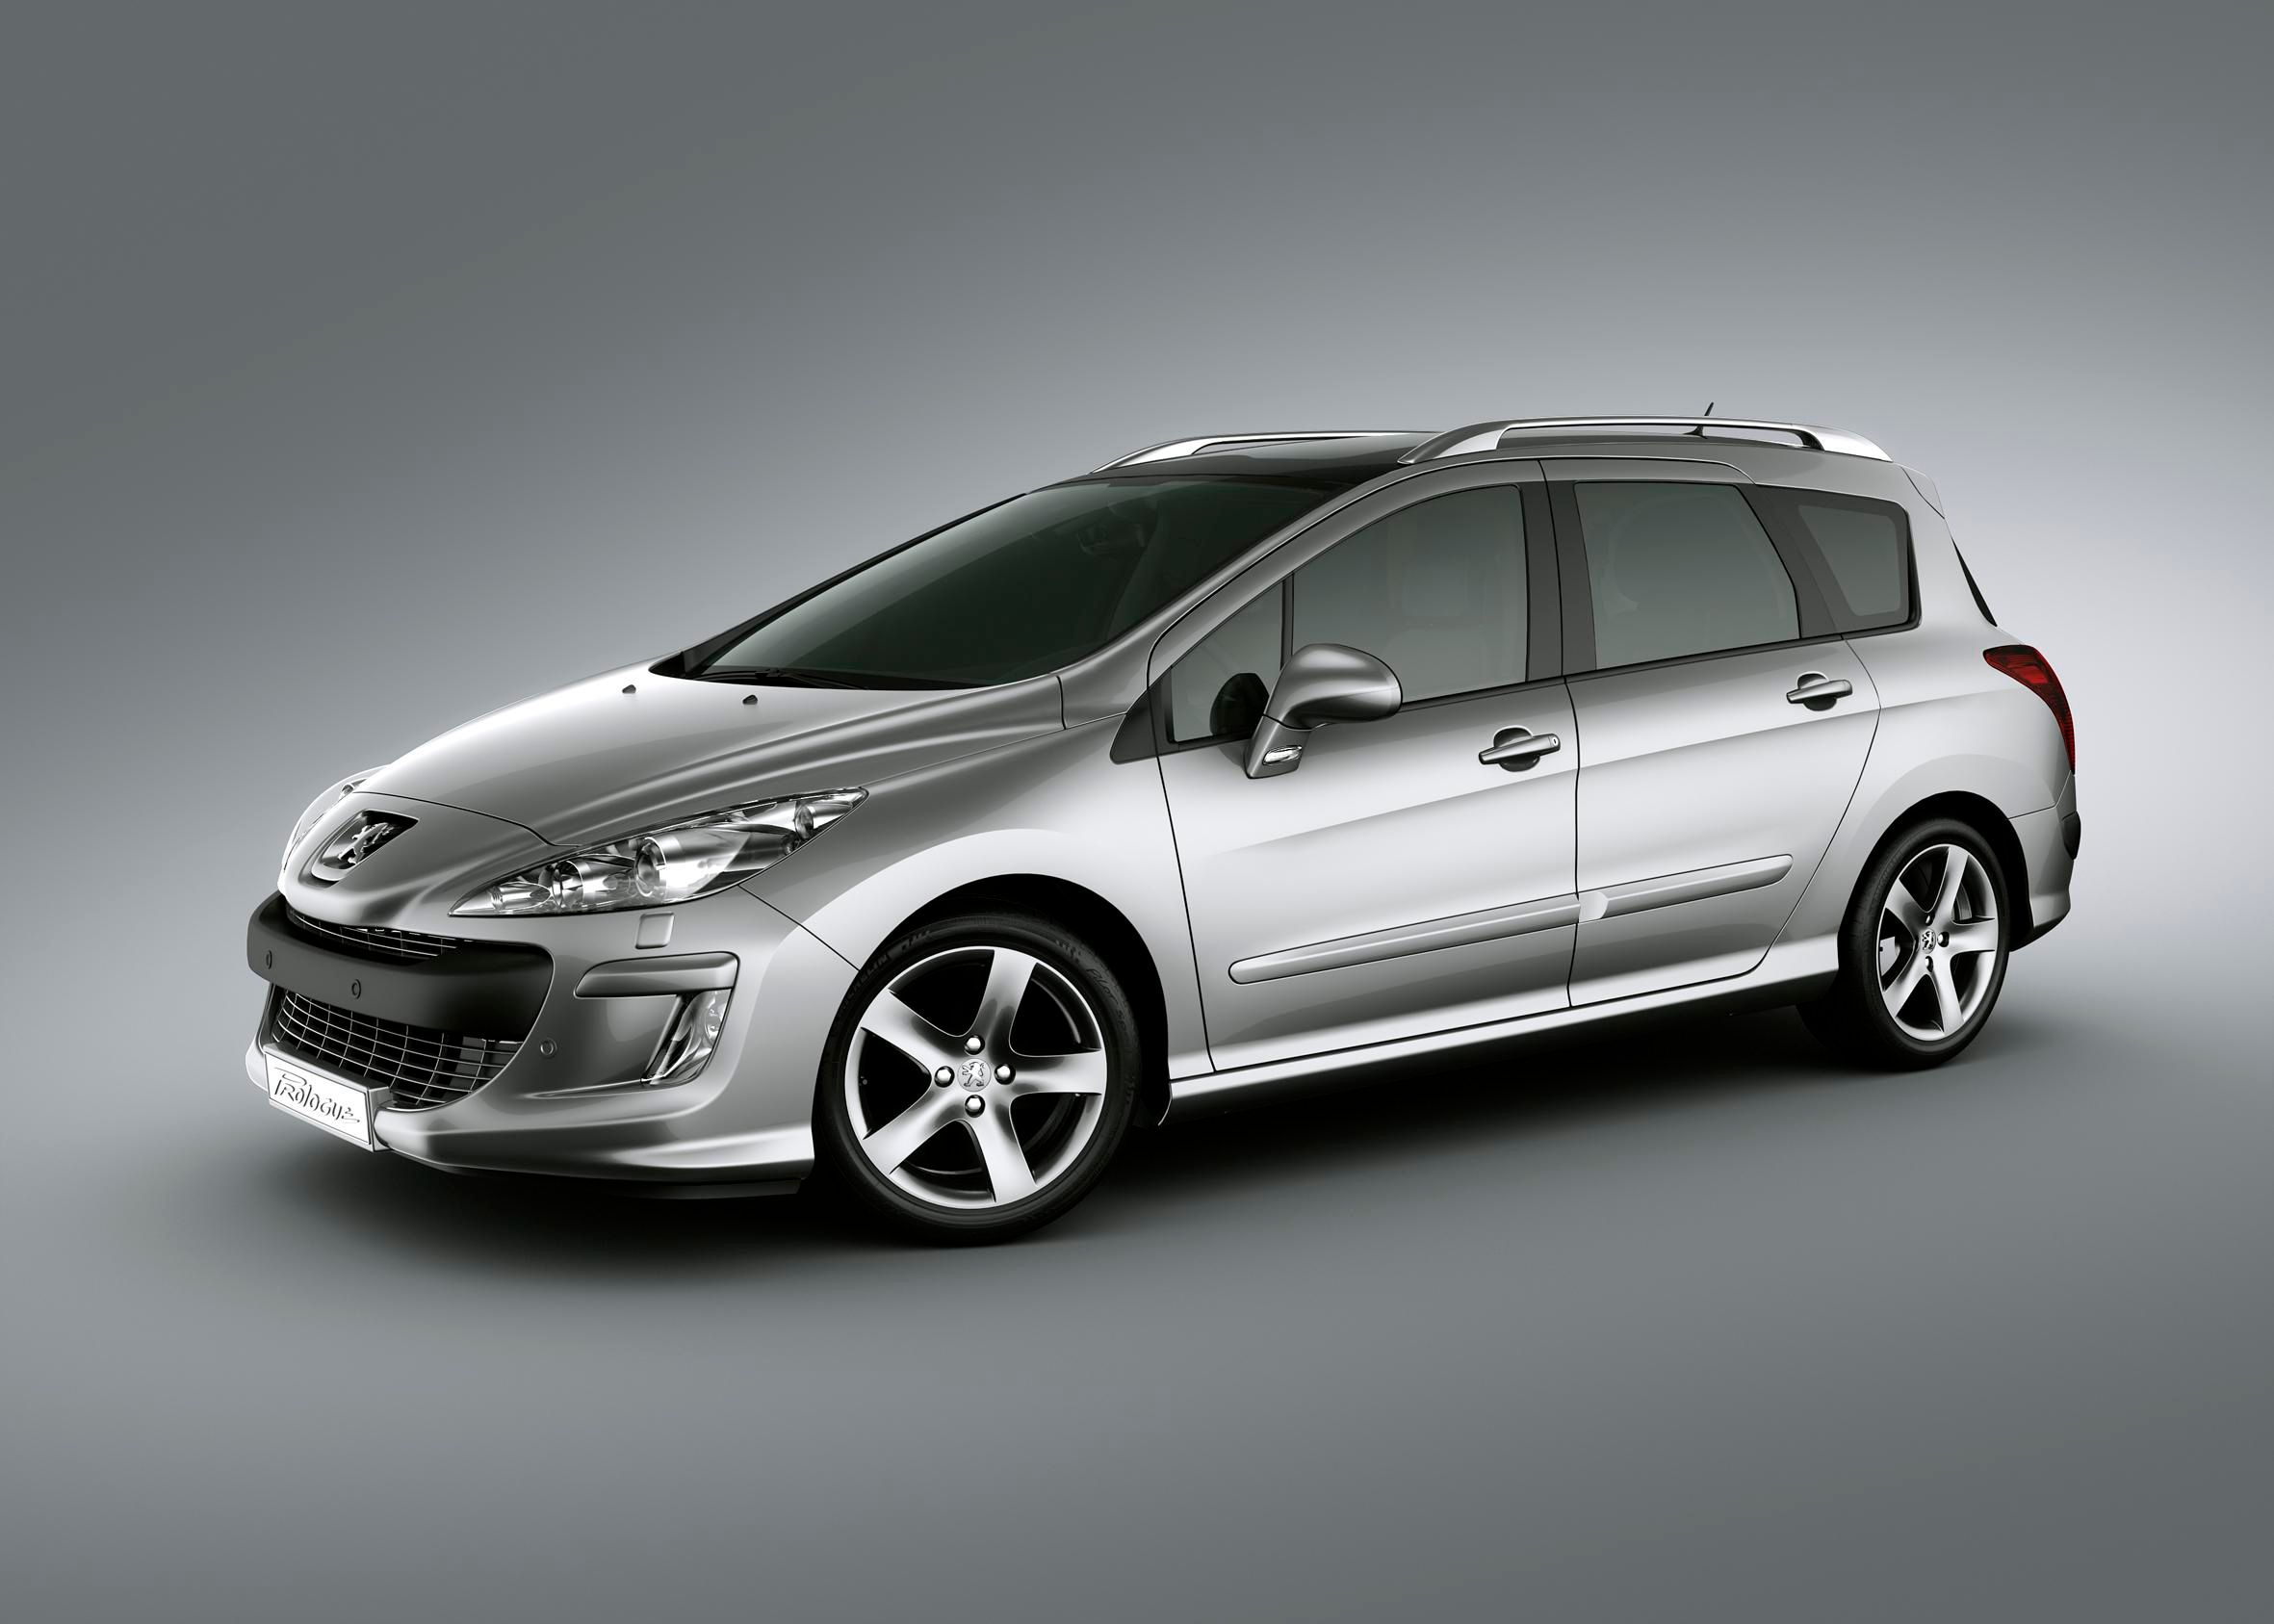 PEUGEOT 308 SW, SPORT AND FAMILY - Auto&Design